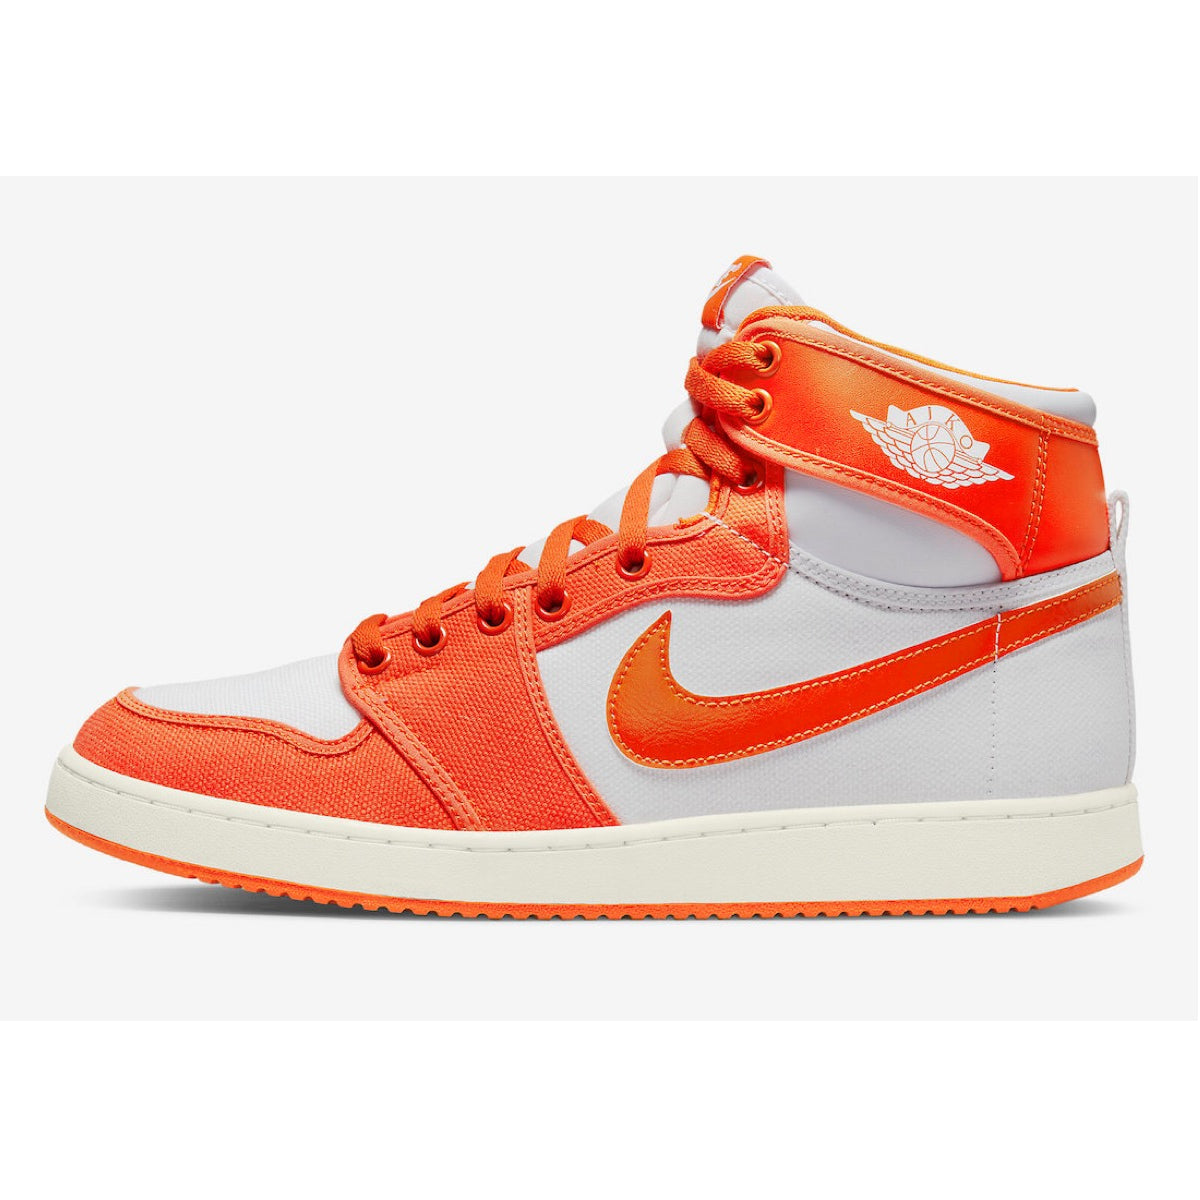 NIKE AJKO 1 “SYRACUSE” / 4.16 RELEASE – THE NETWORK BUSINESS